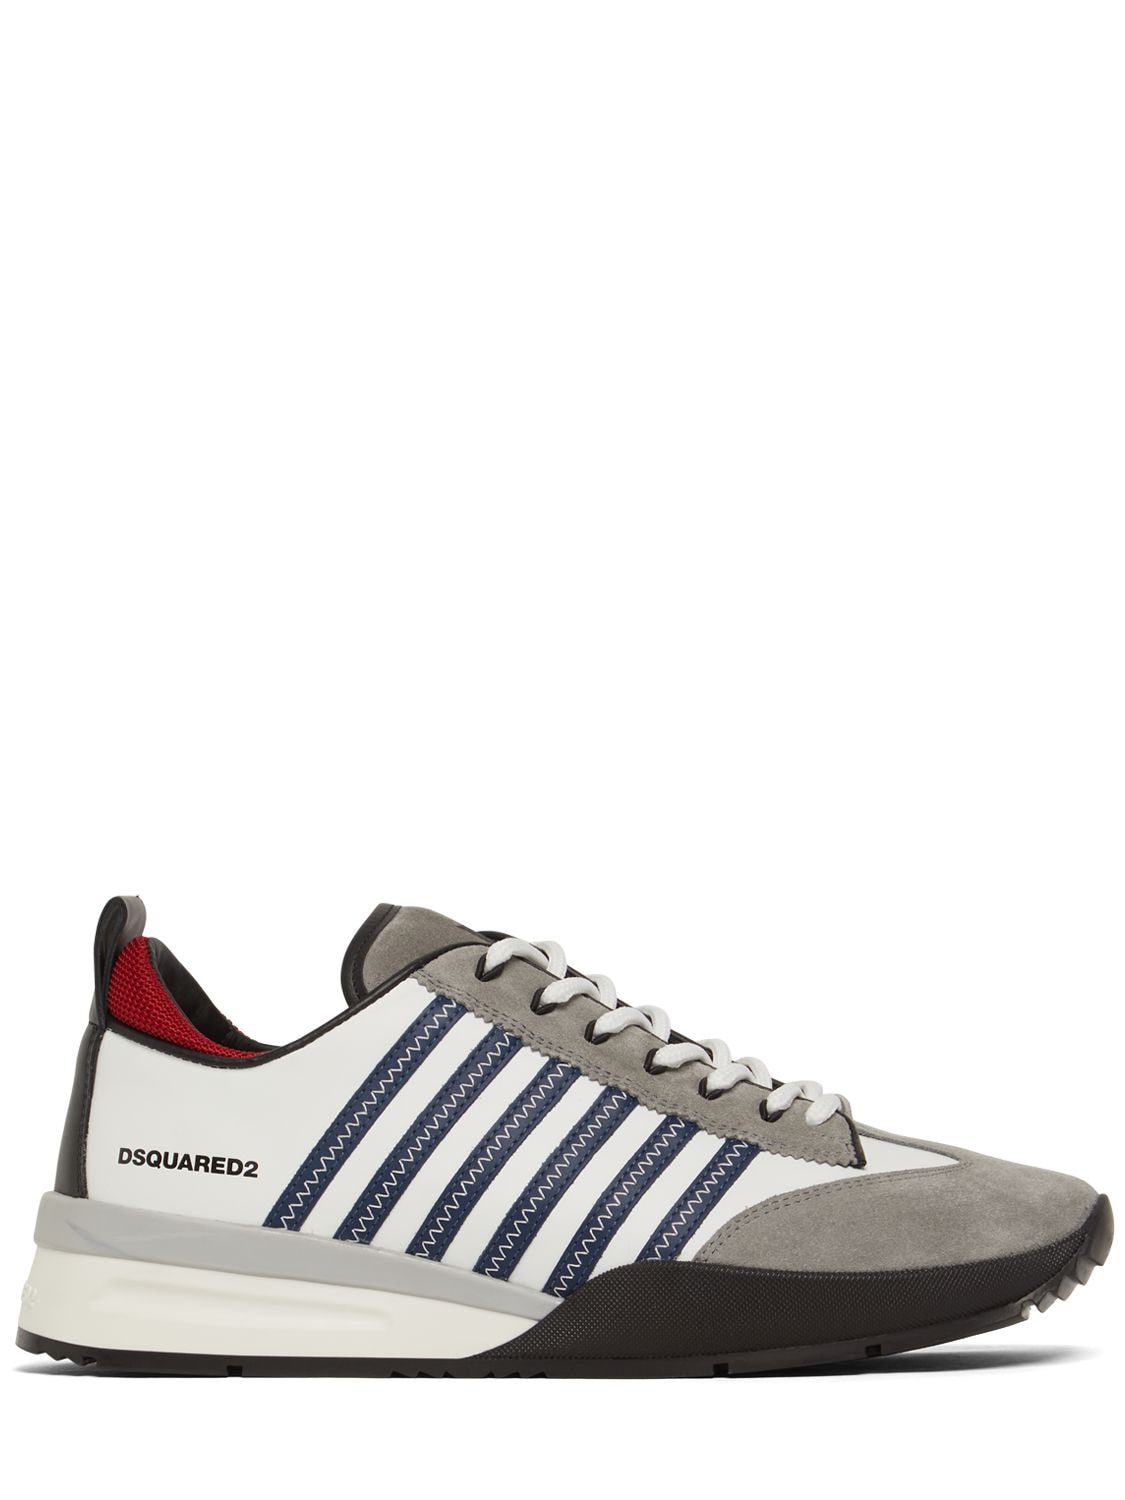 DSQUARED2 LEGEND 251 MIX LEATHER LOW TOP SNEAKERS